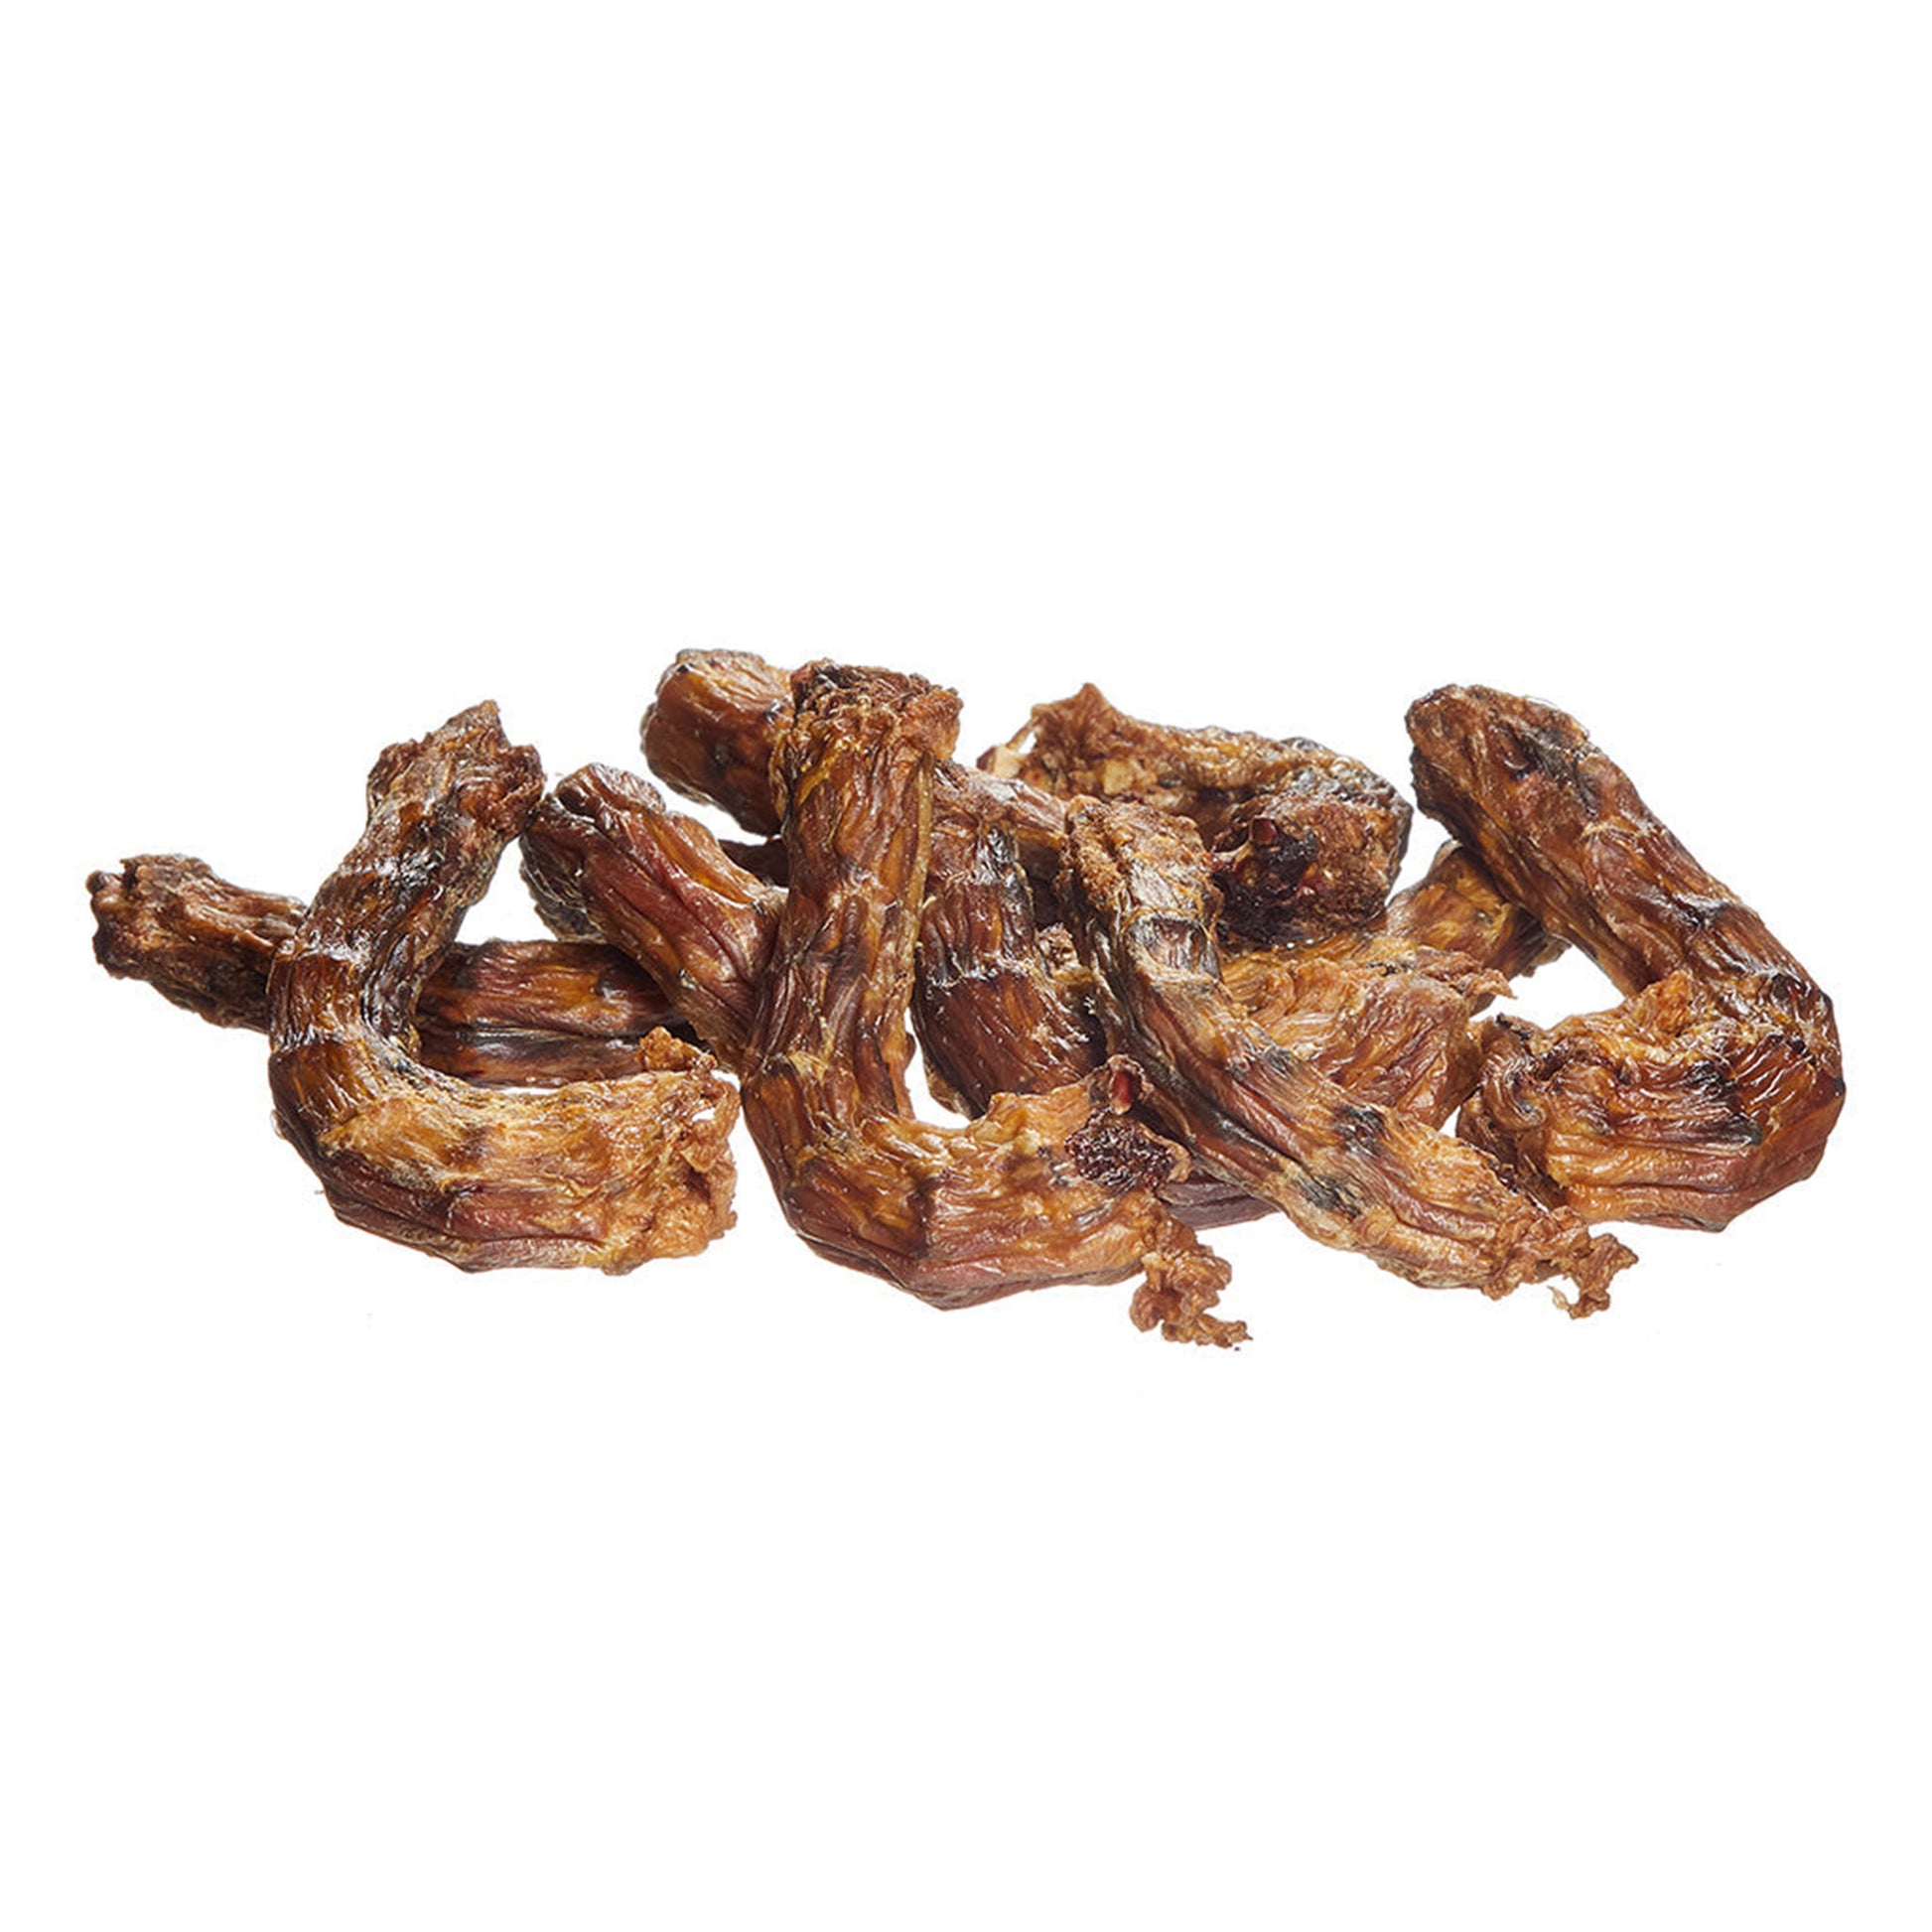 Buy Dehydrated Chicken Necks - Wholesome Pet Treats for Happy Pups